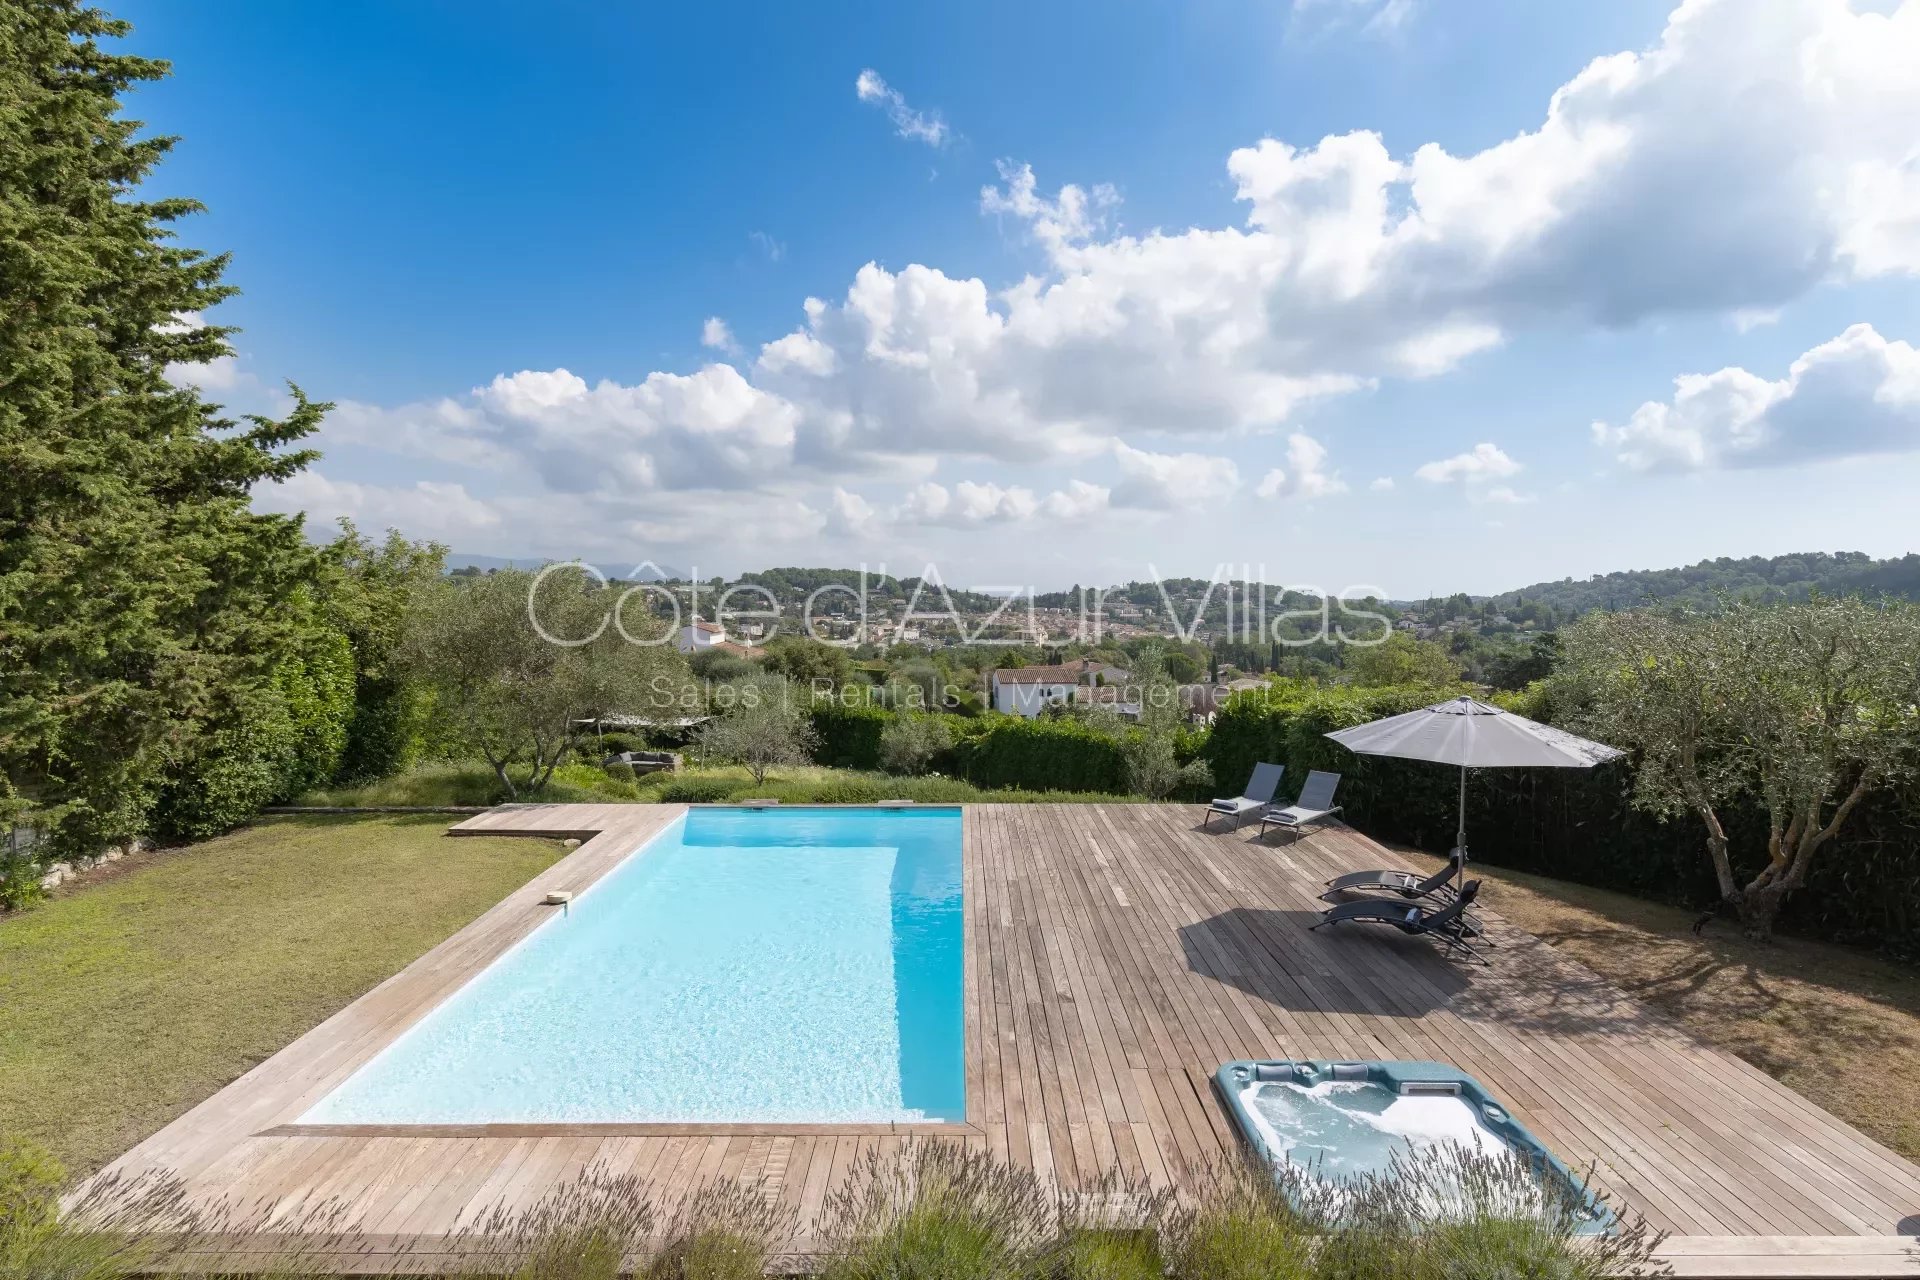 Splendid contemporary villa with panoramic views over the mountains and the village